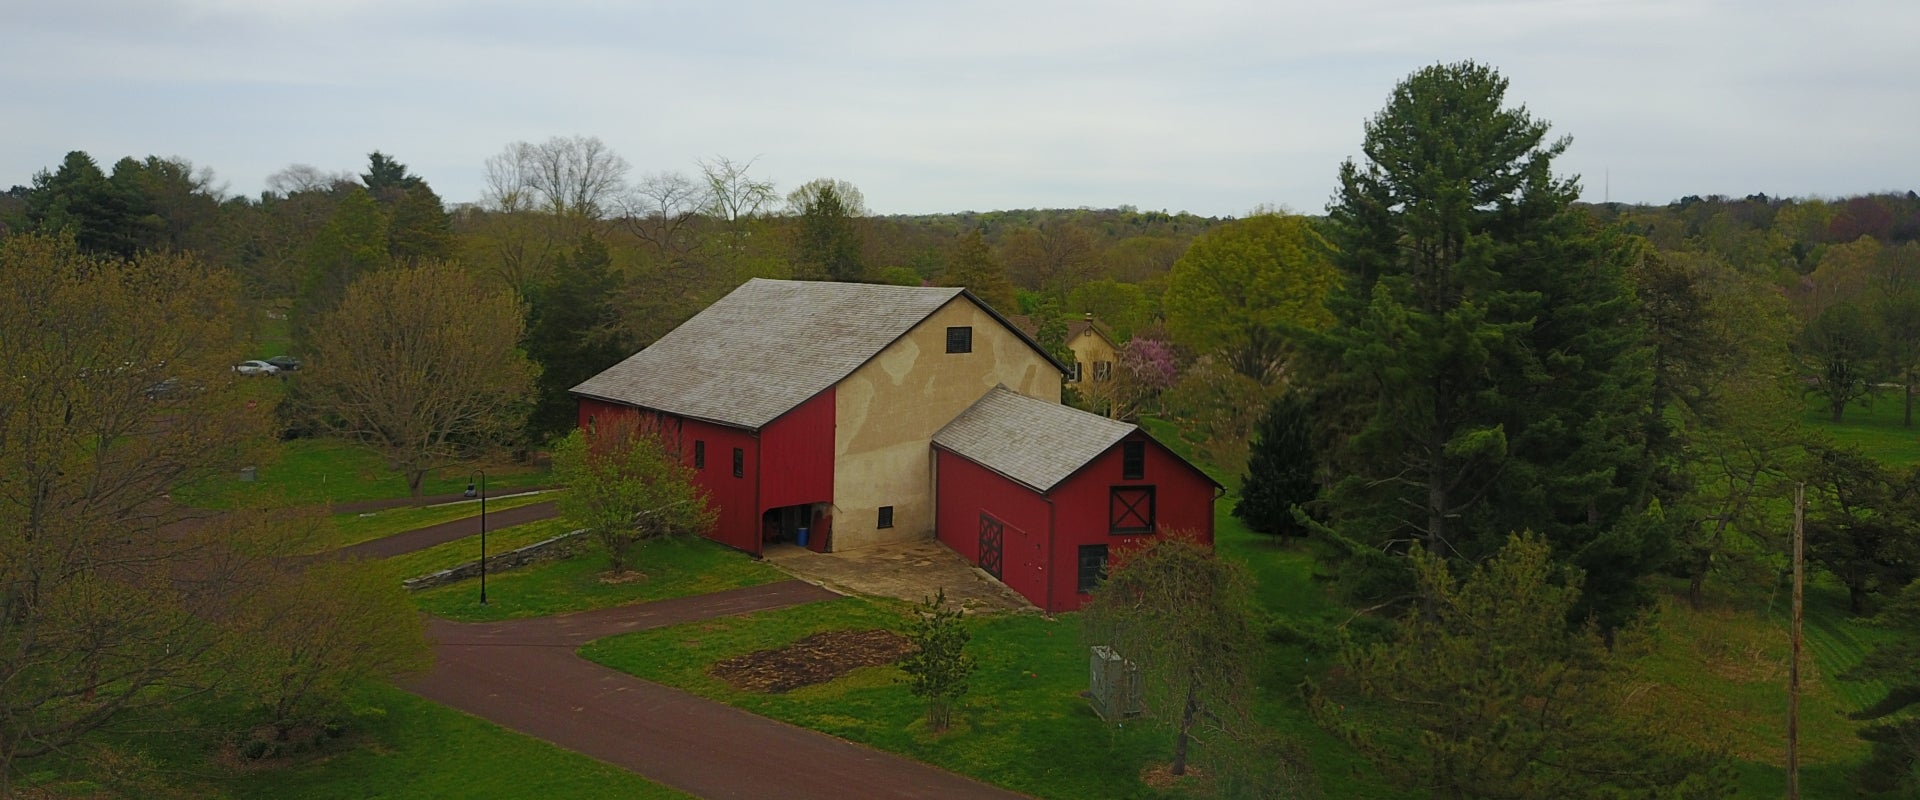 An aerial view of a red barn among trees.